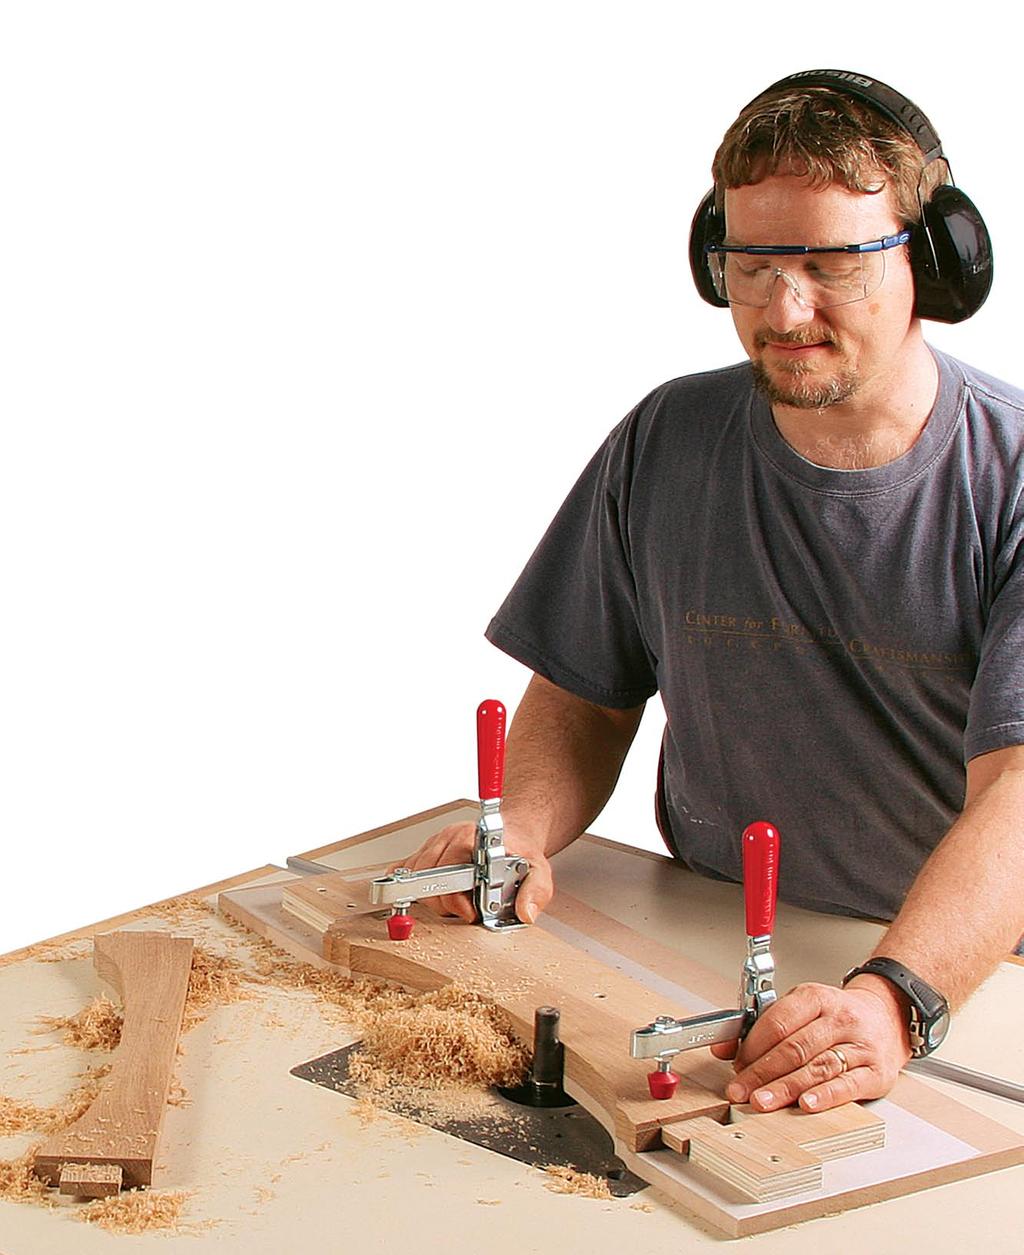 5 Essential Jigs for the Router Table Great fixtures and fences offer better control and new possibilities BY PETER SCHLEBECKER In a recent article, I wrote about the router table I built for the